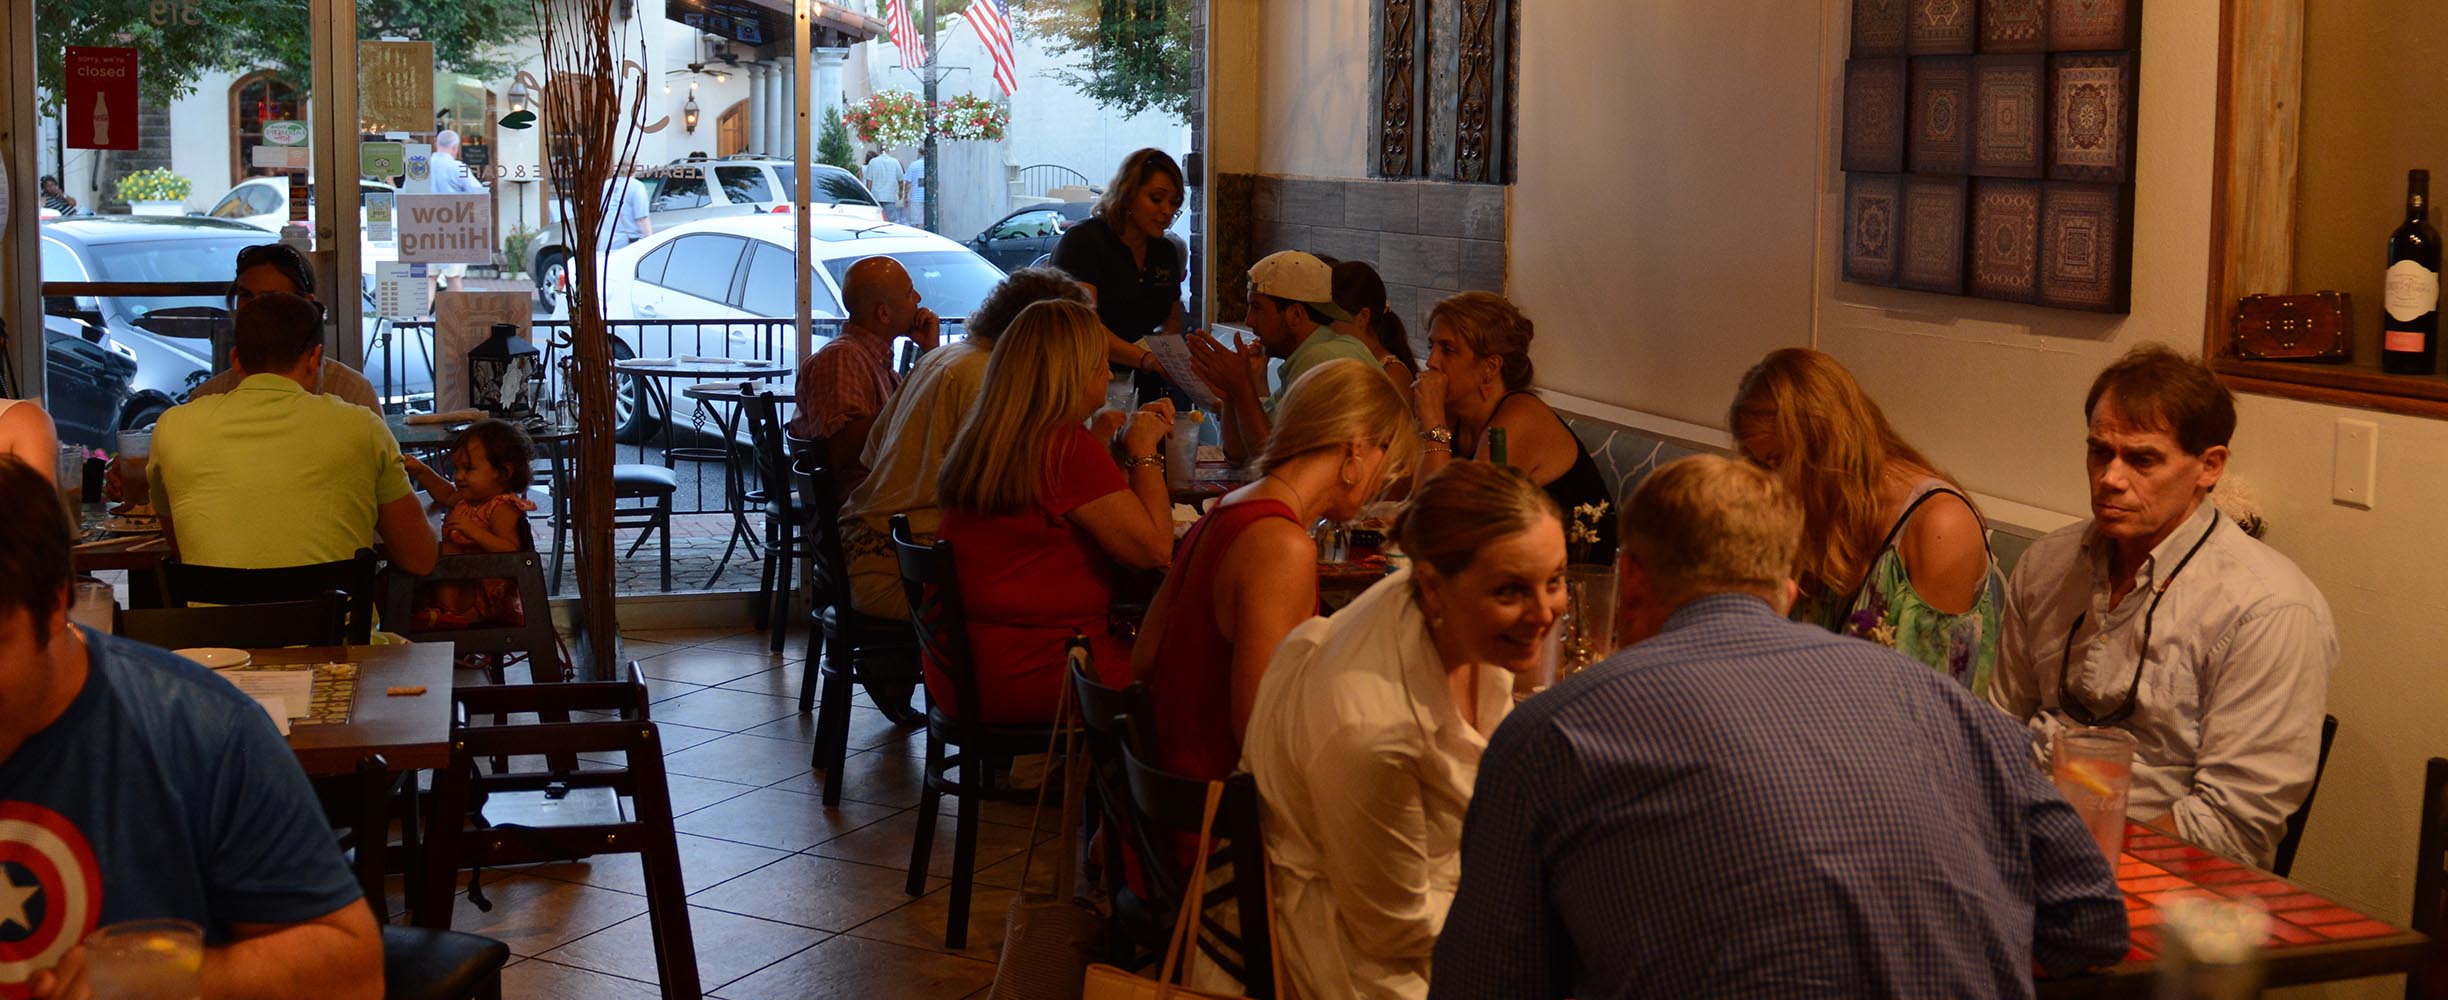 Our restaurant ambiance is for indiduals, couples, families and groups. We also see business meetings over lunch in Fairhope becoming more popular.